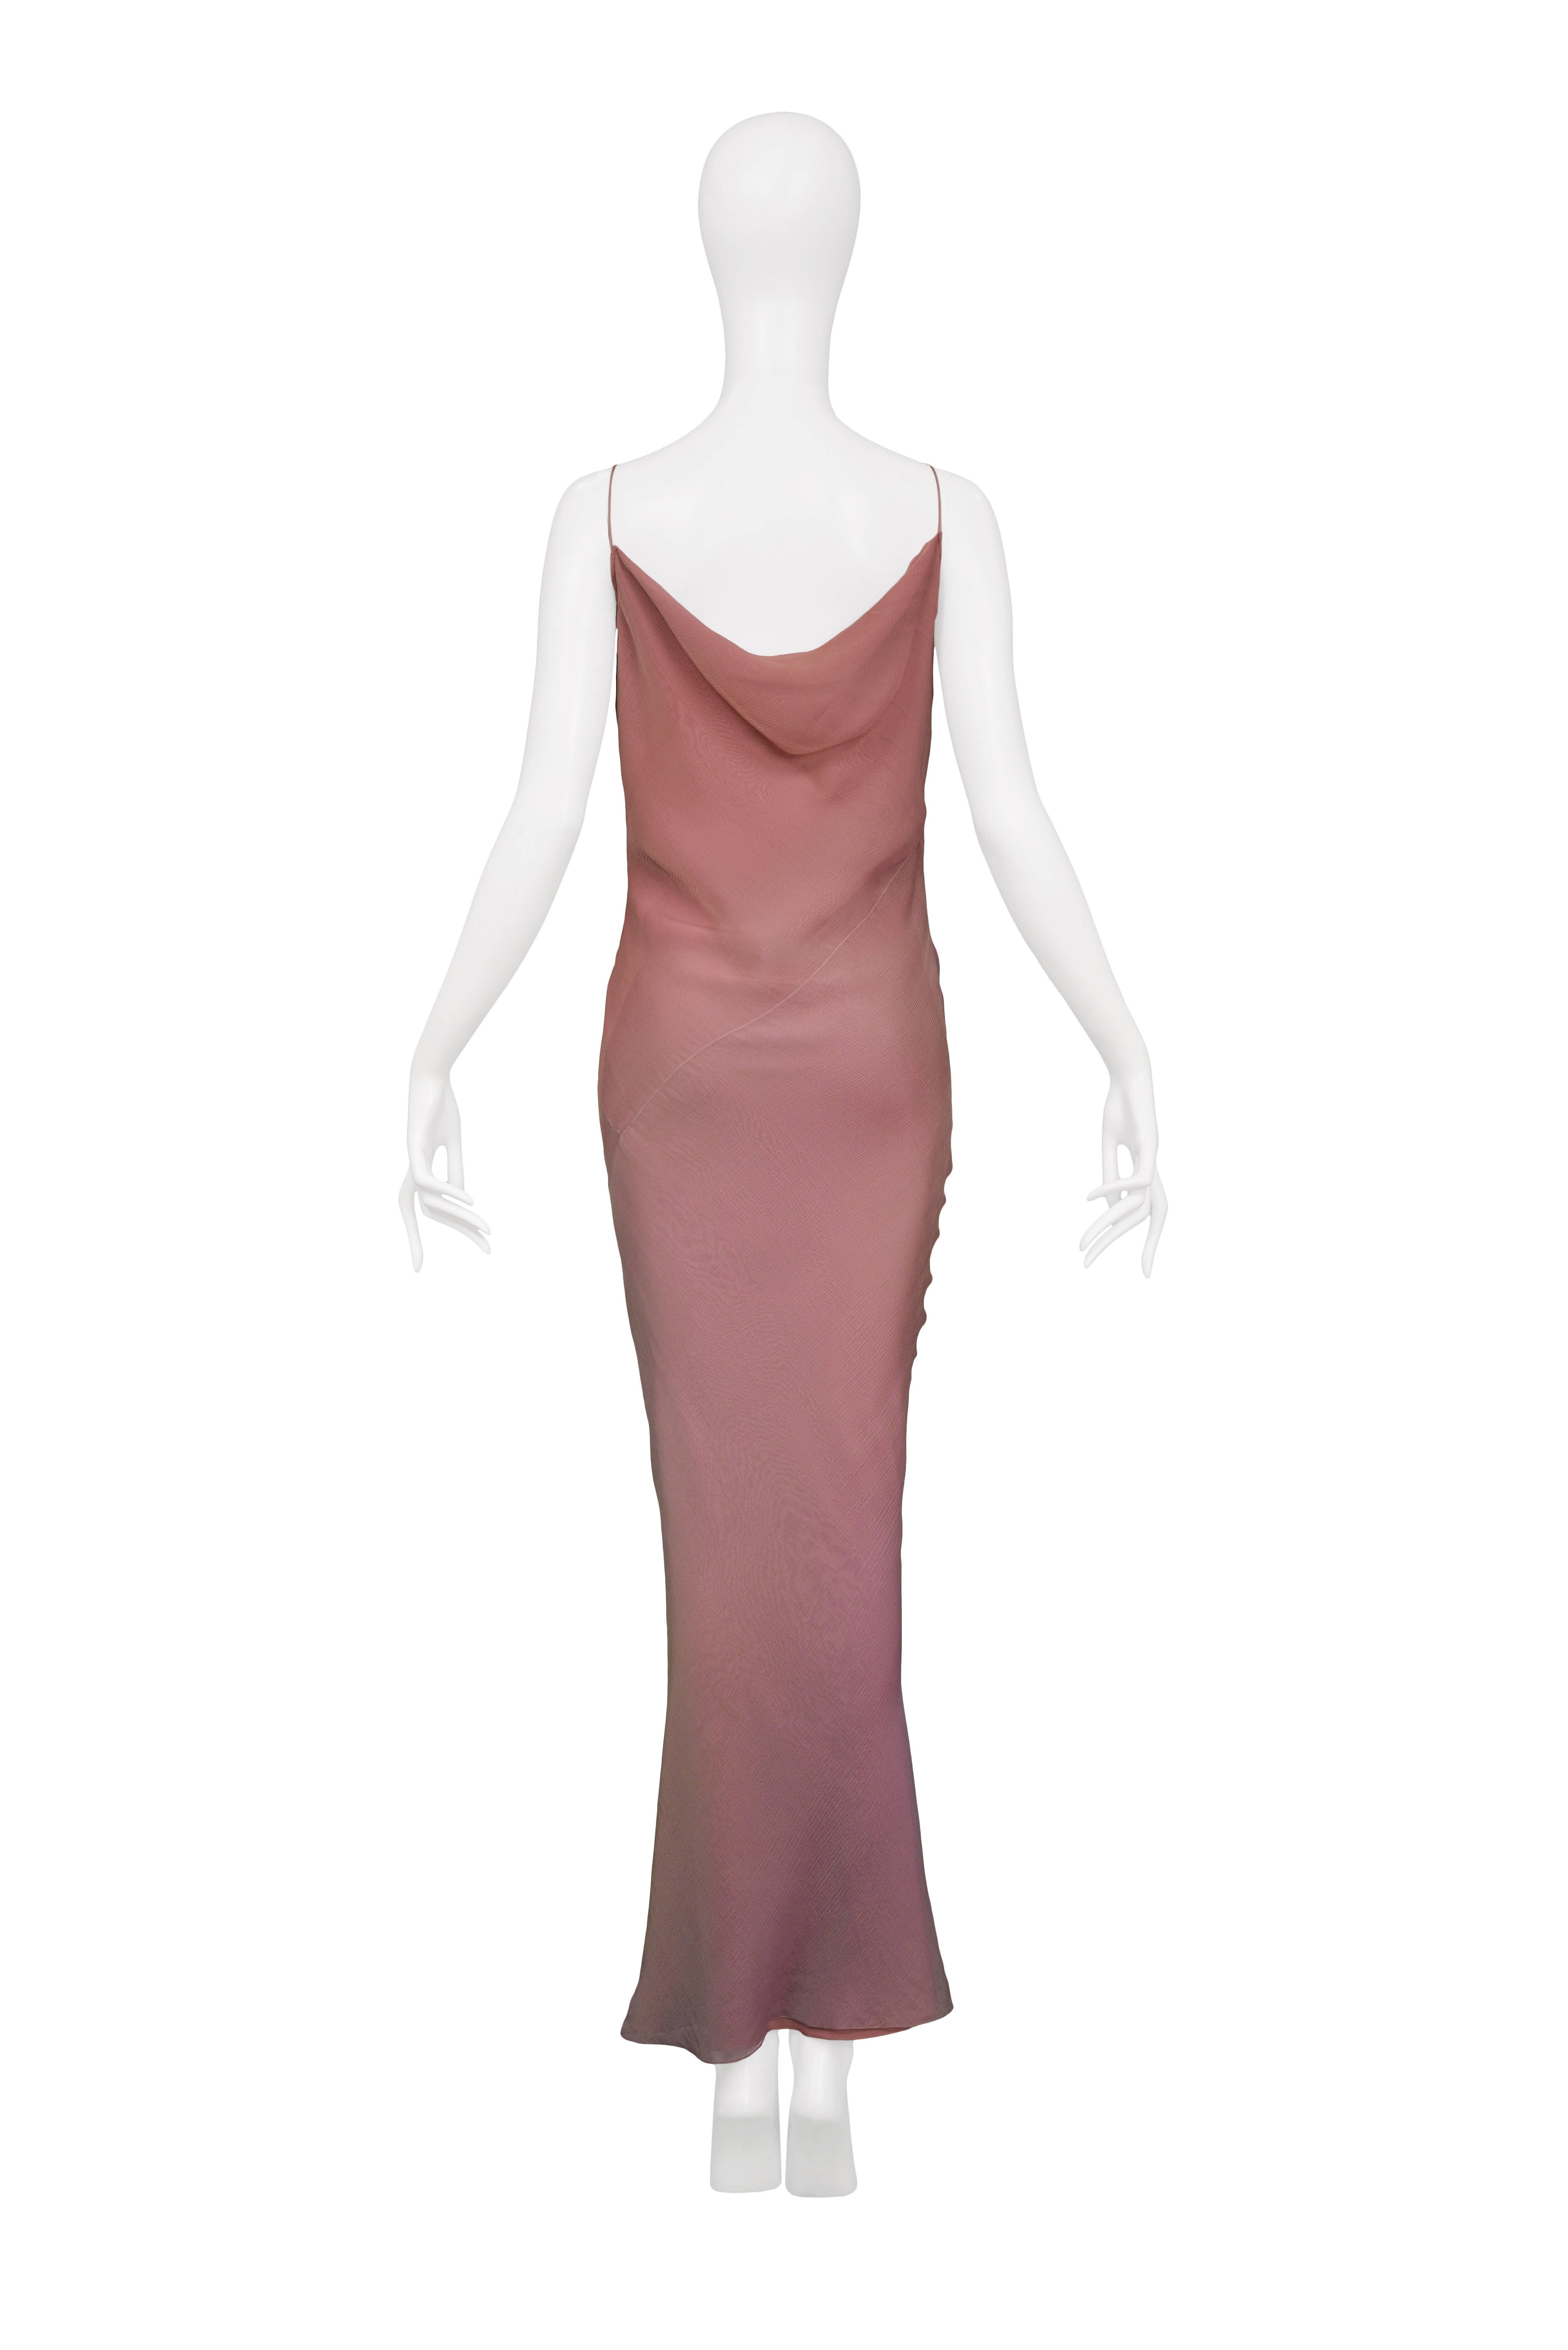 CHRISTIAN DIOR

OMBRE GAMBLER DICE DRESS 2005
Condition : Excellent Vintage Condition
Size : 40
Vintage Dior by John Galliano blush tone ombre 